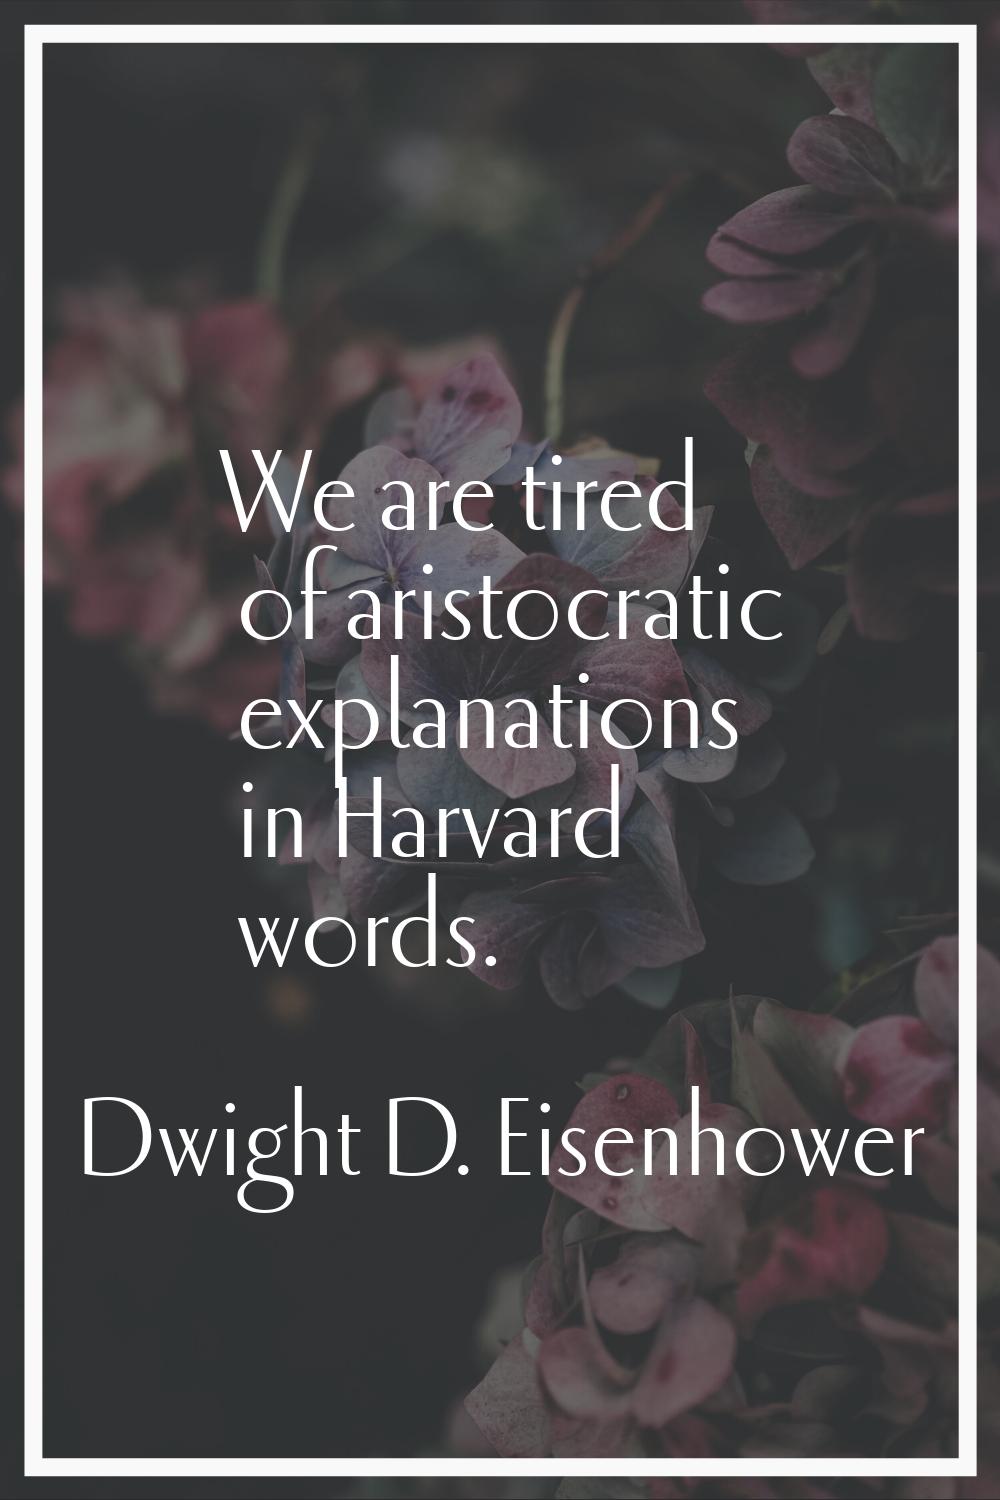 We are tired of aristocratic explanations in Harvard words.